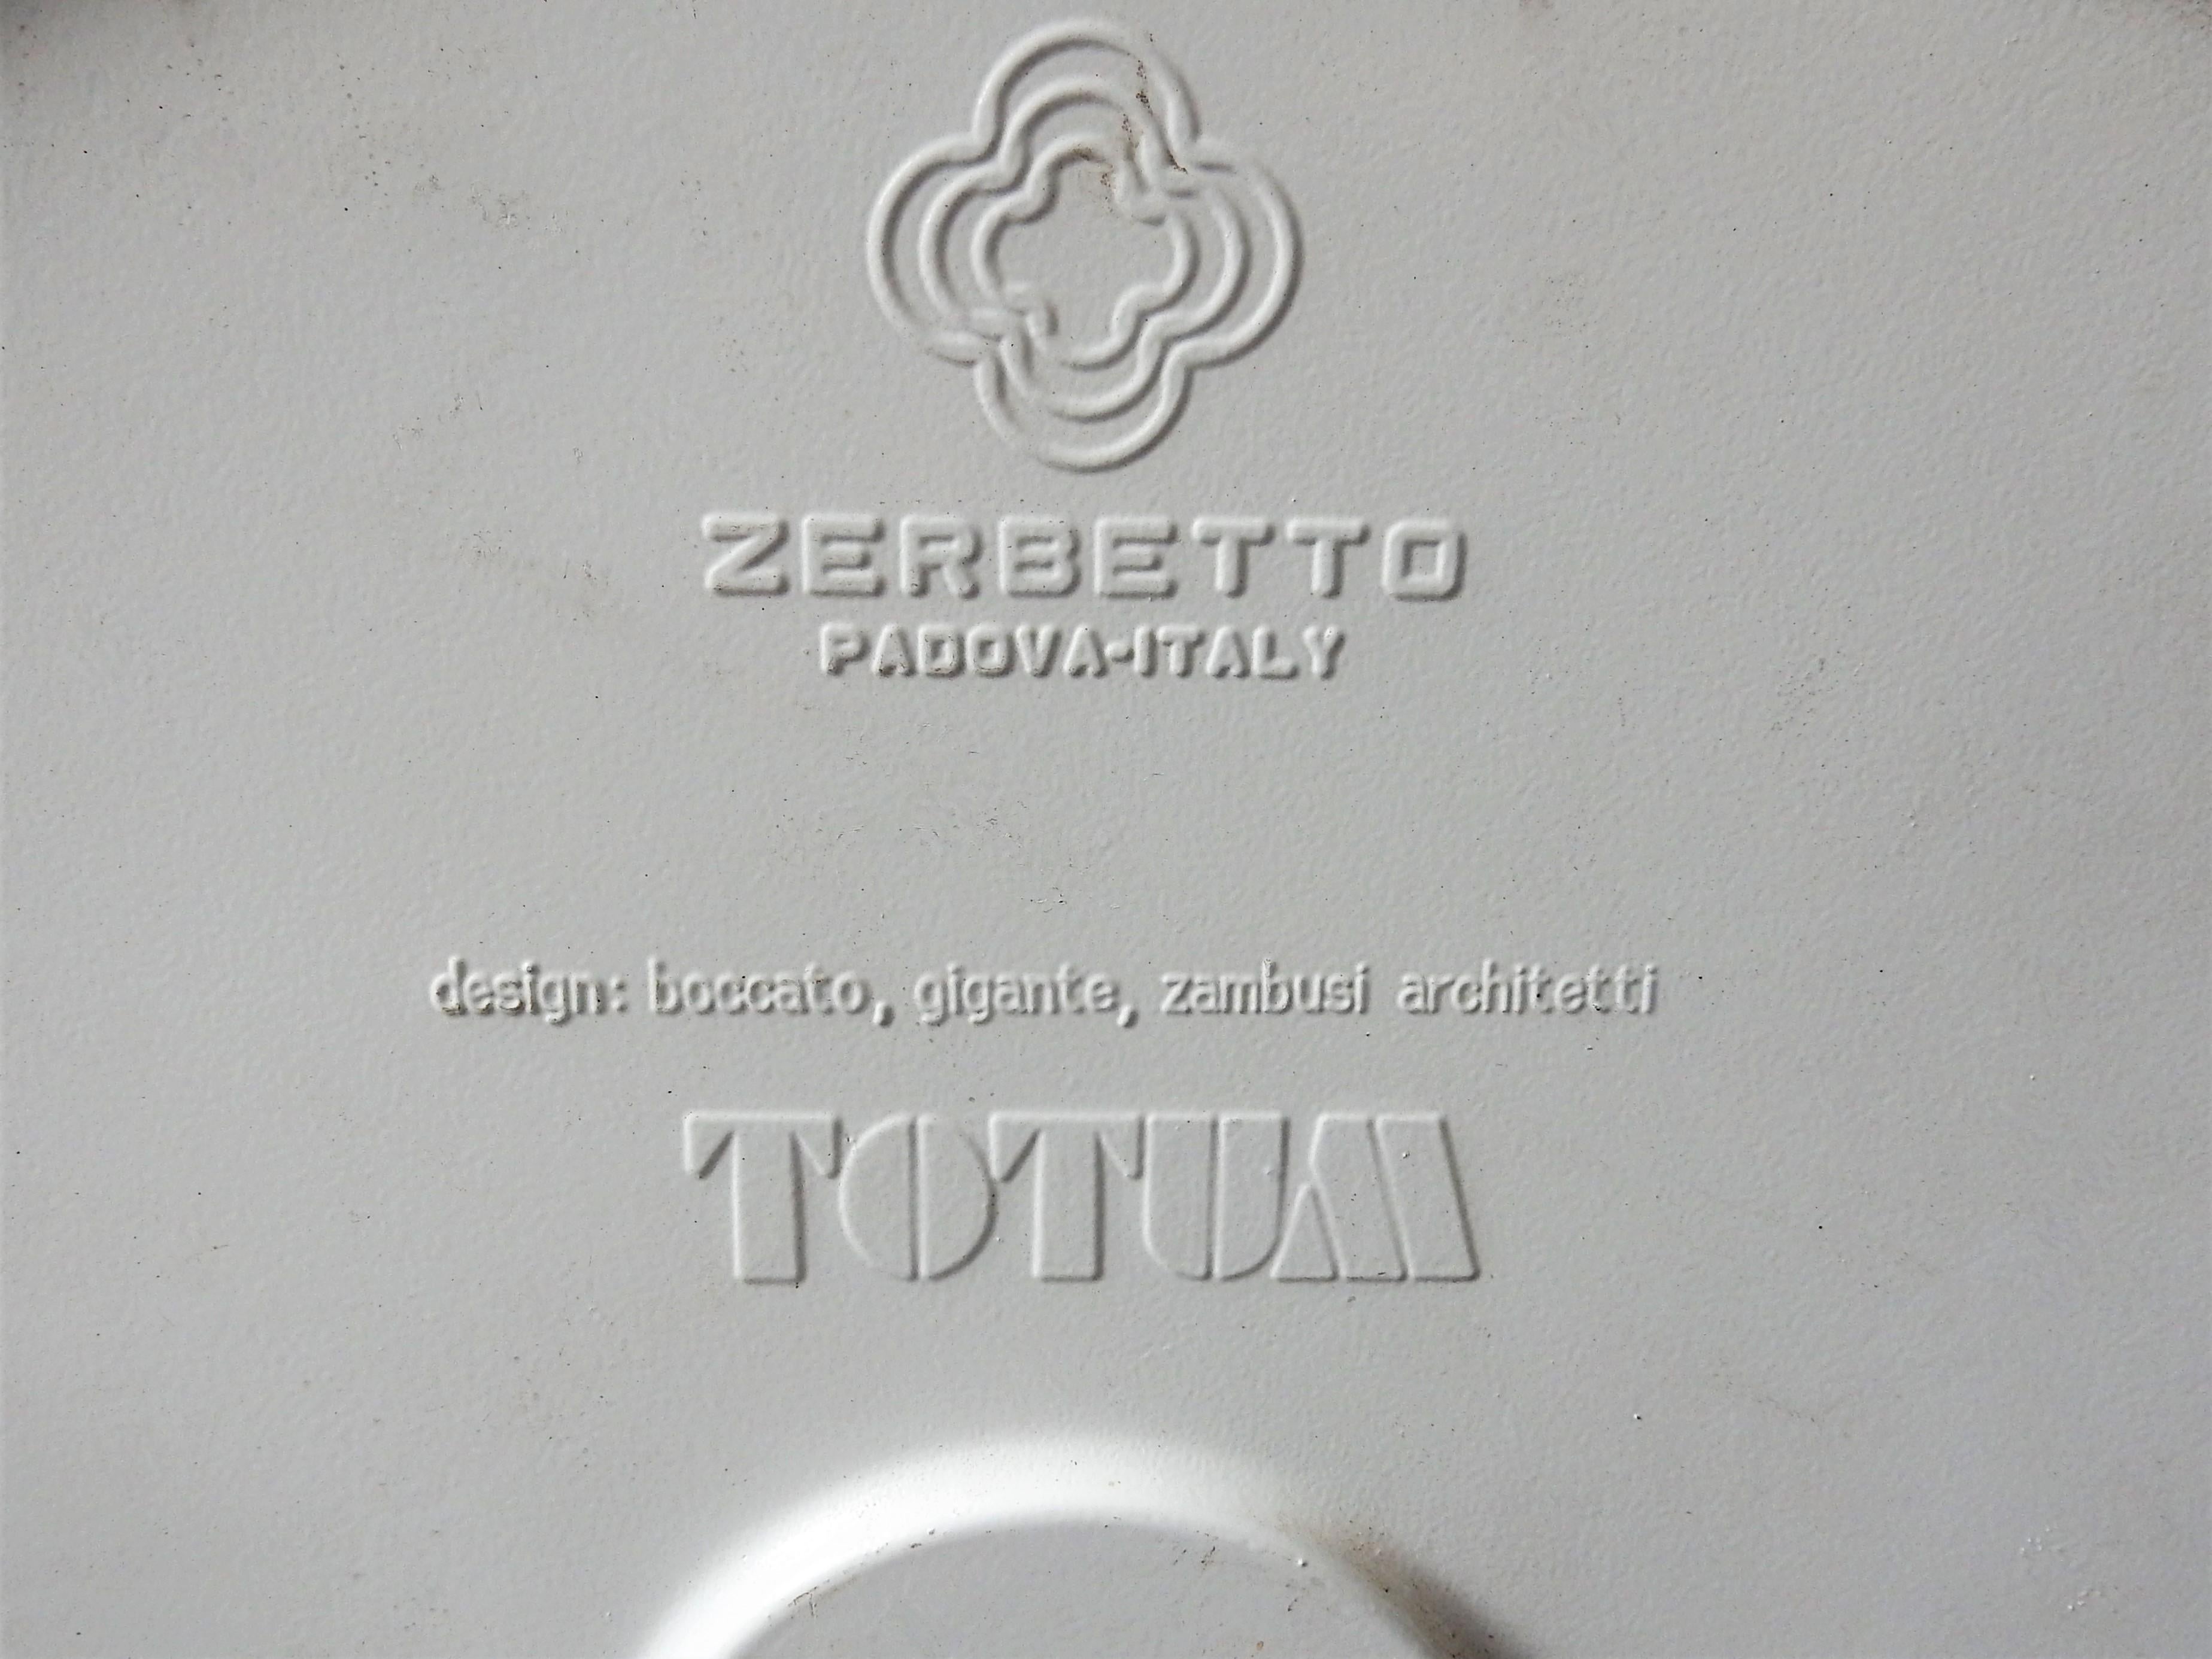 Mid-Century Modern Totum Wall/Ceiling Lamp by Bocatto, Gigante and Zambusi for Zerbetto  For Sale